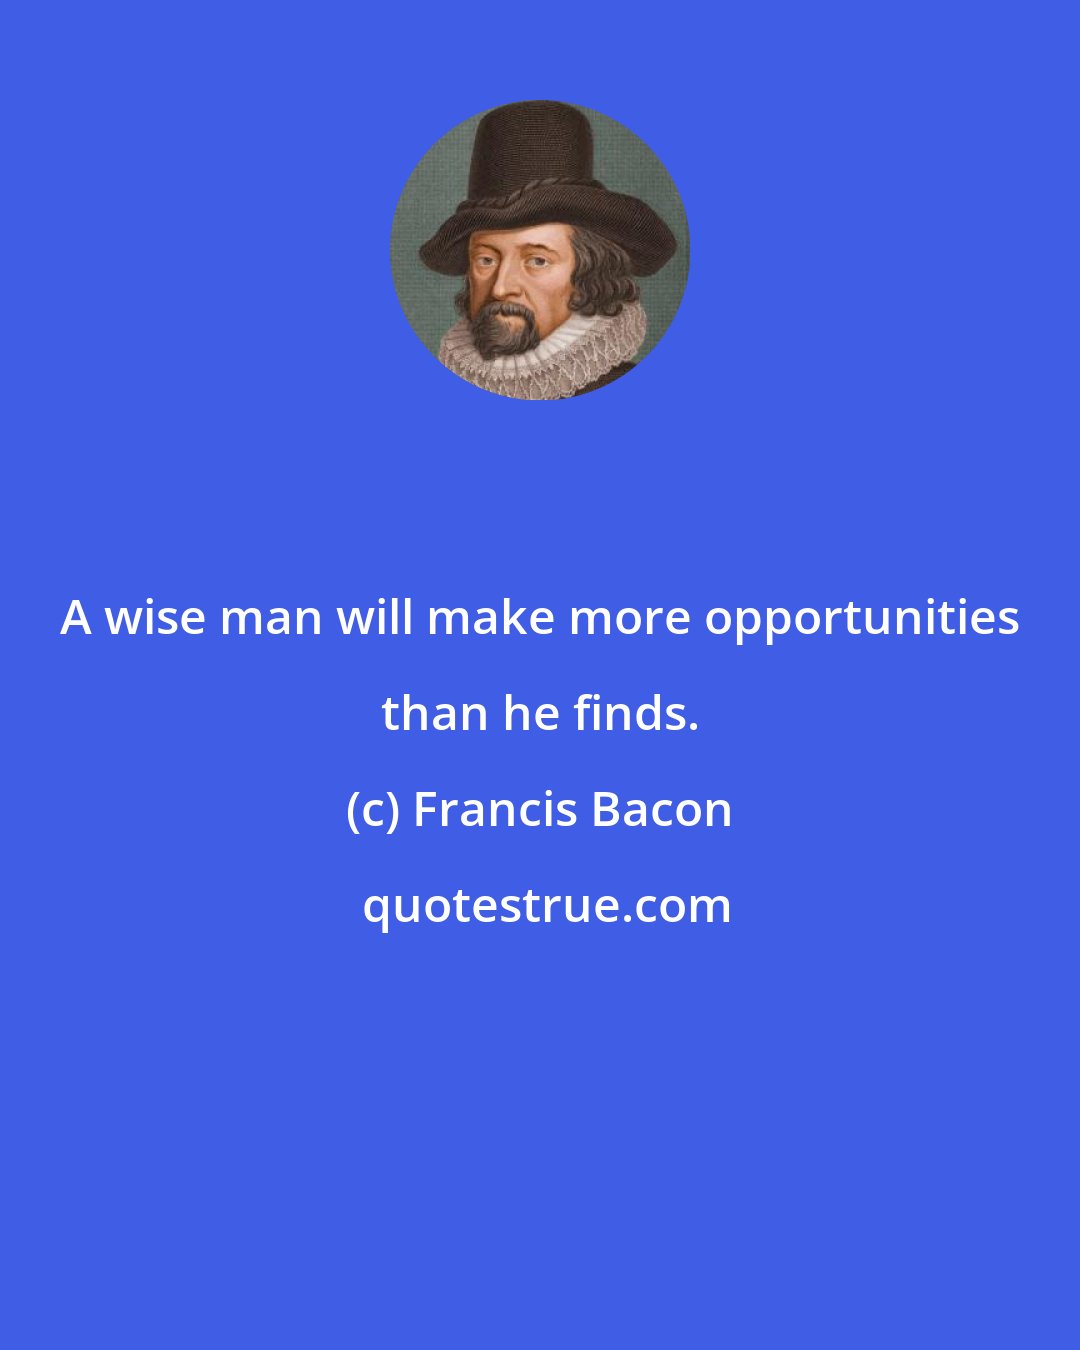 Francis Bacon: A wise man will make more opportunities than he finds.